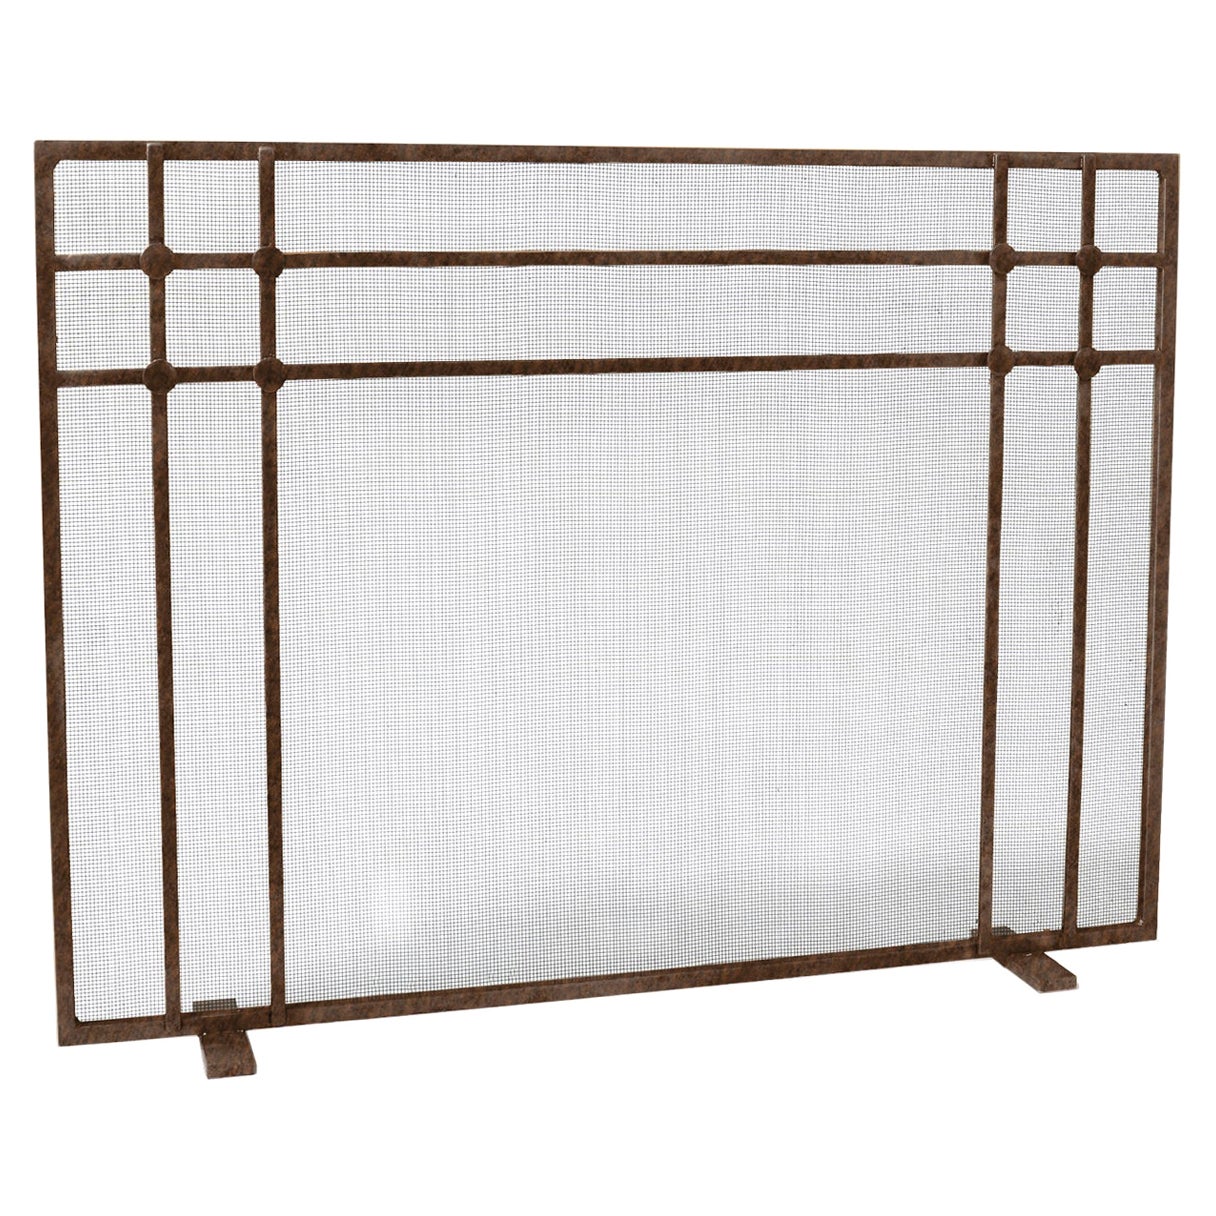 Henry Fireplace Screen in Gold Rubbed Black For Sale